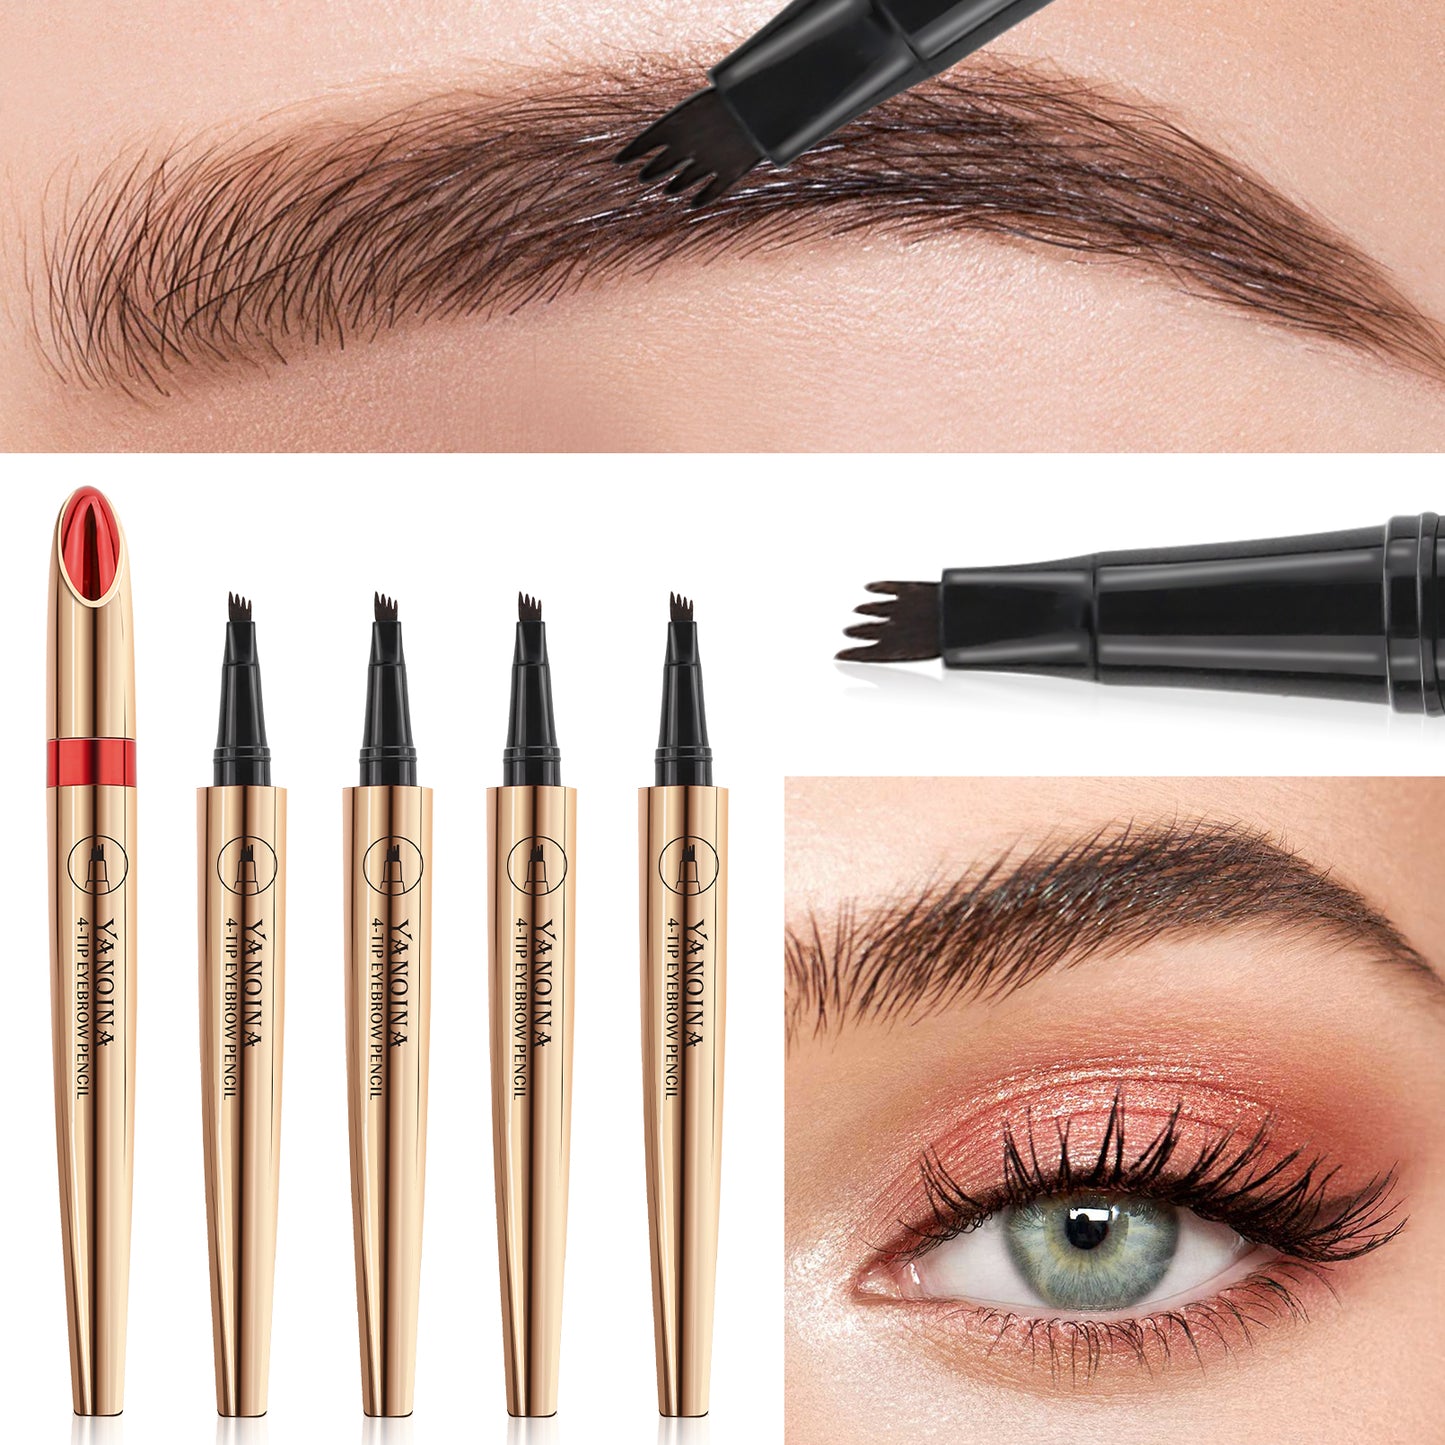 4D Waterproof Liquid Eyebrow Pen: Achieve Natural and Precise Results with Four Fork Tip